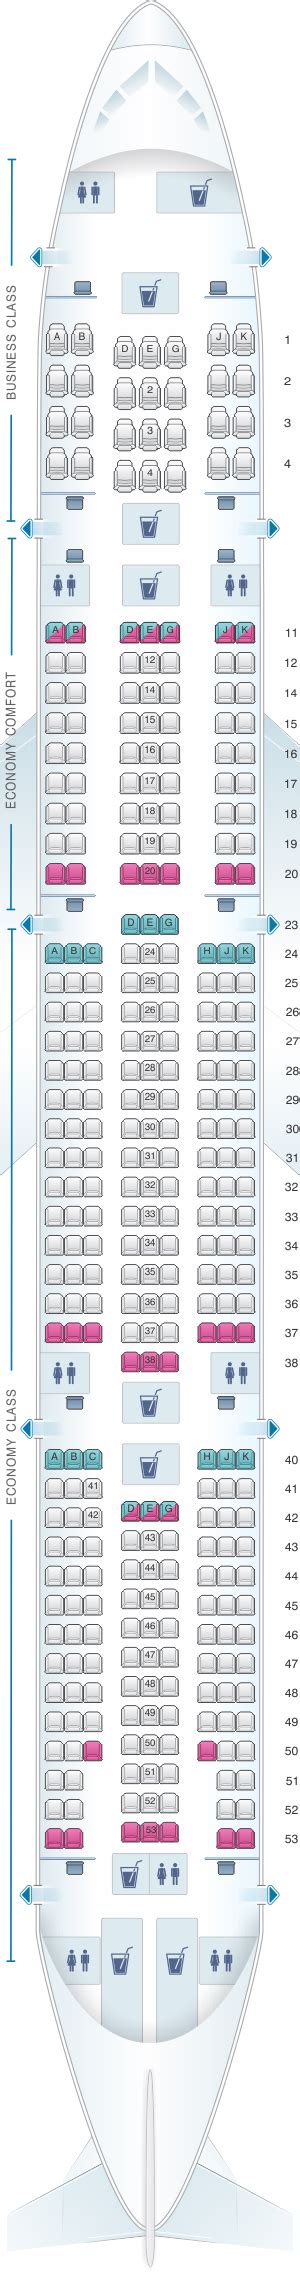 A330 Seat Map Turkish Airlines